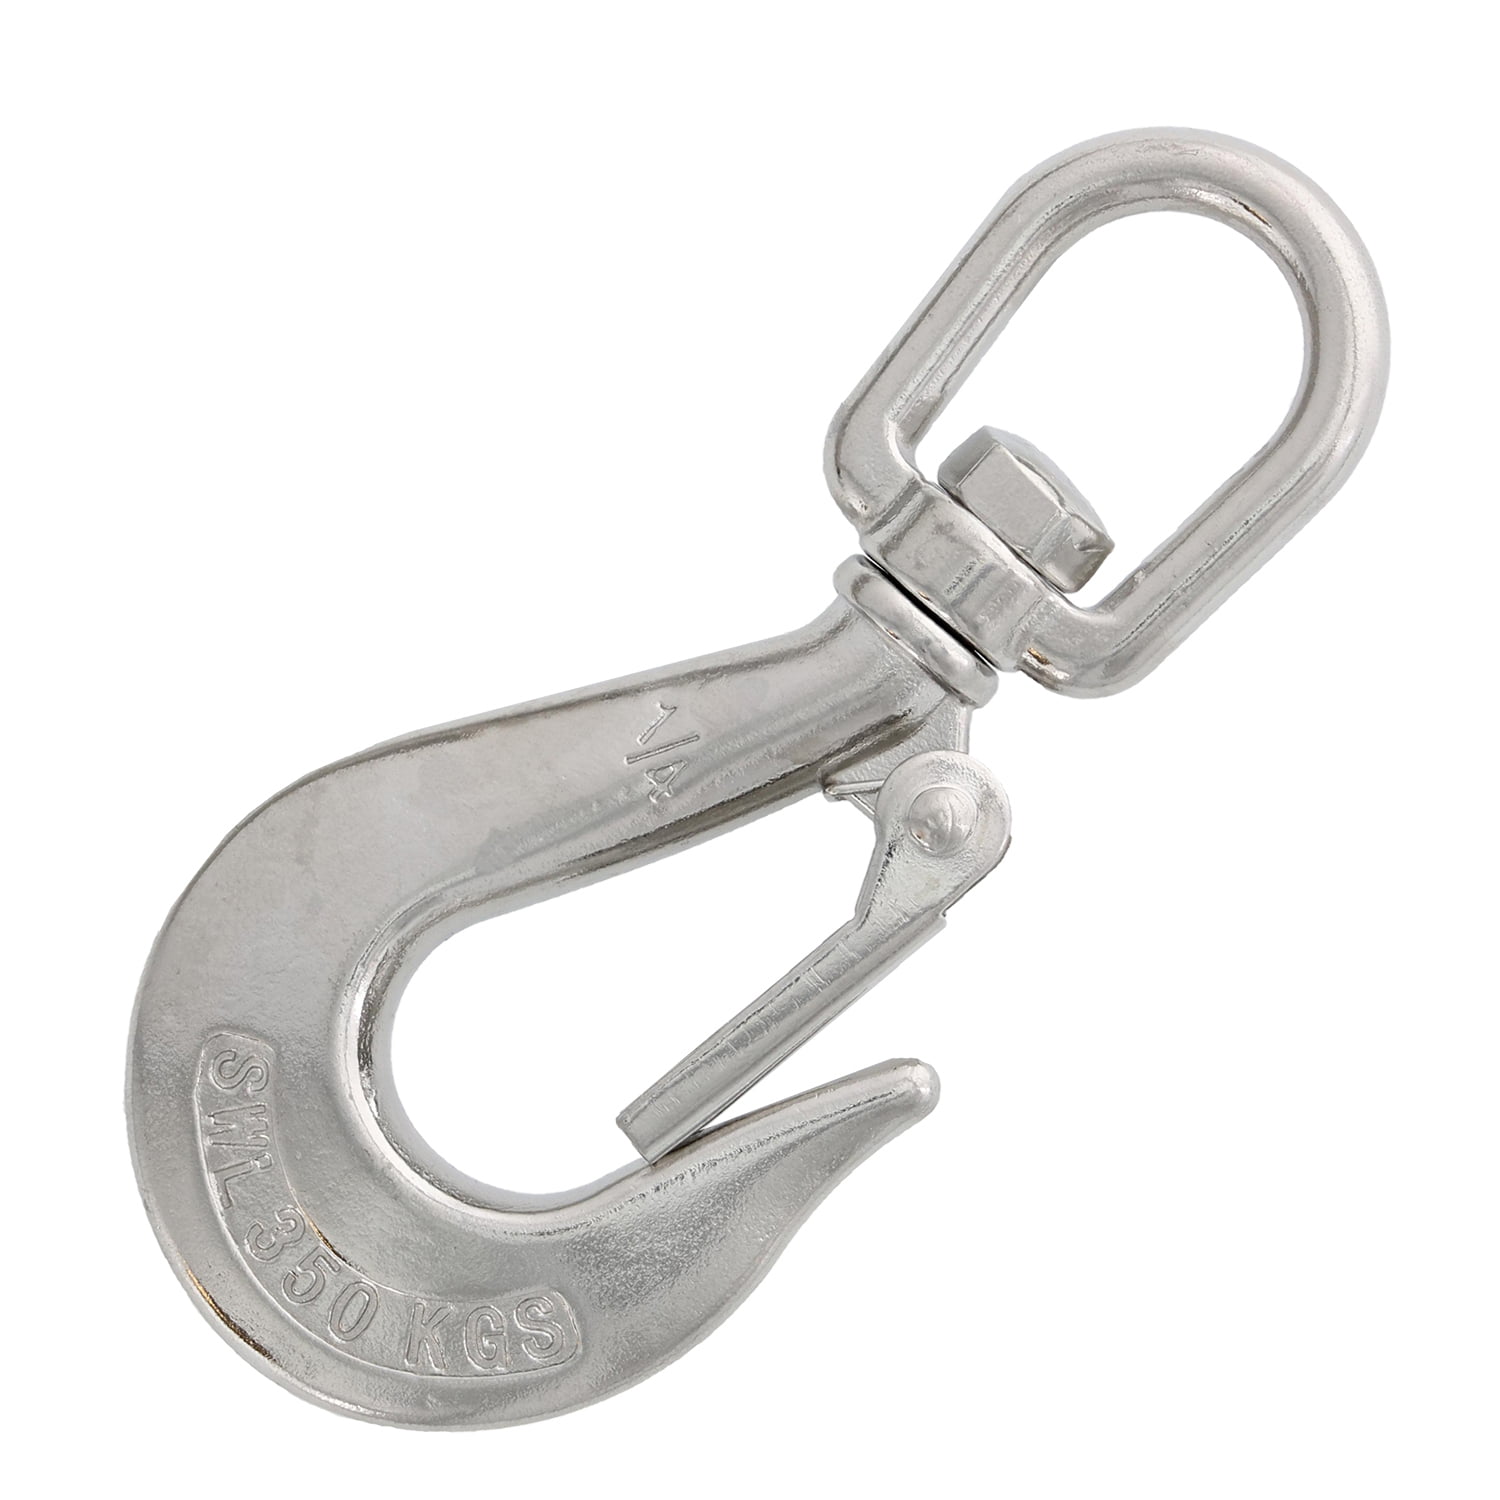 Thimble Wire Rope Grip Clamp Eyes Stainless Steel 2/3/4/5/6/8/10/12/14mm 